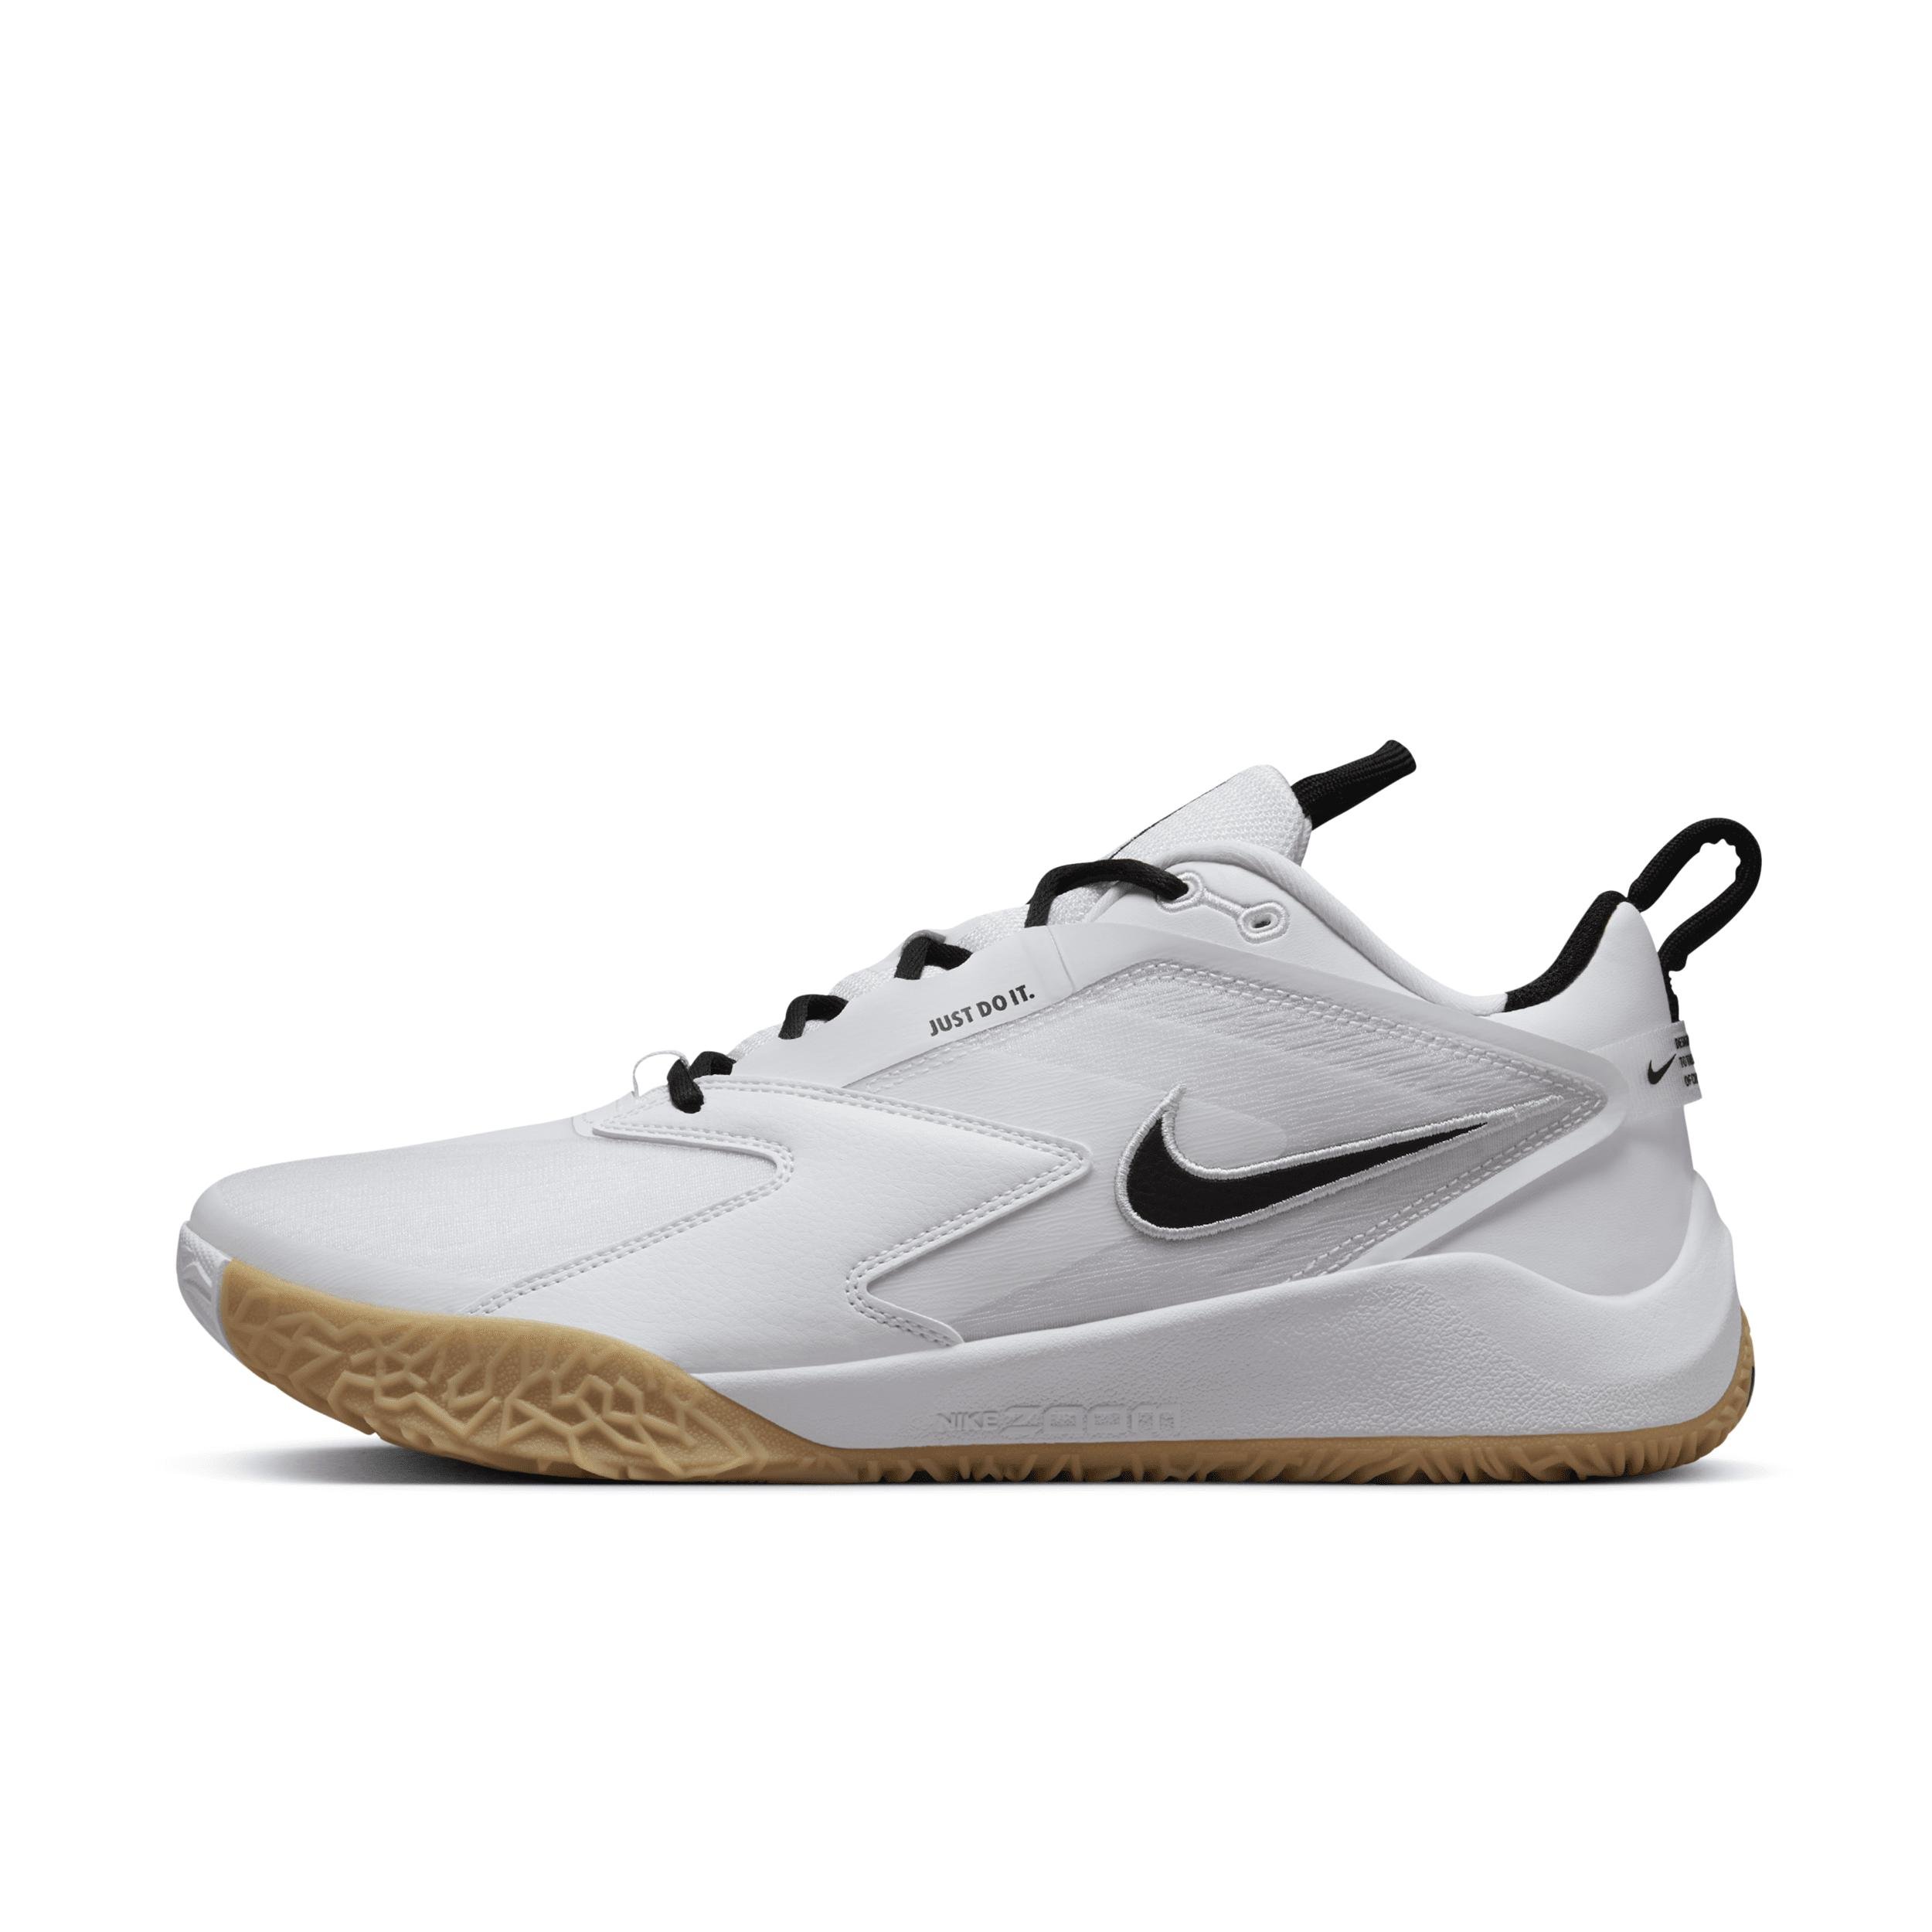 Nike Unisex HyperAce 3 Volleyball Shoes by NIKE